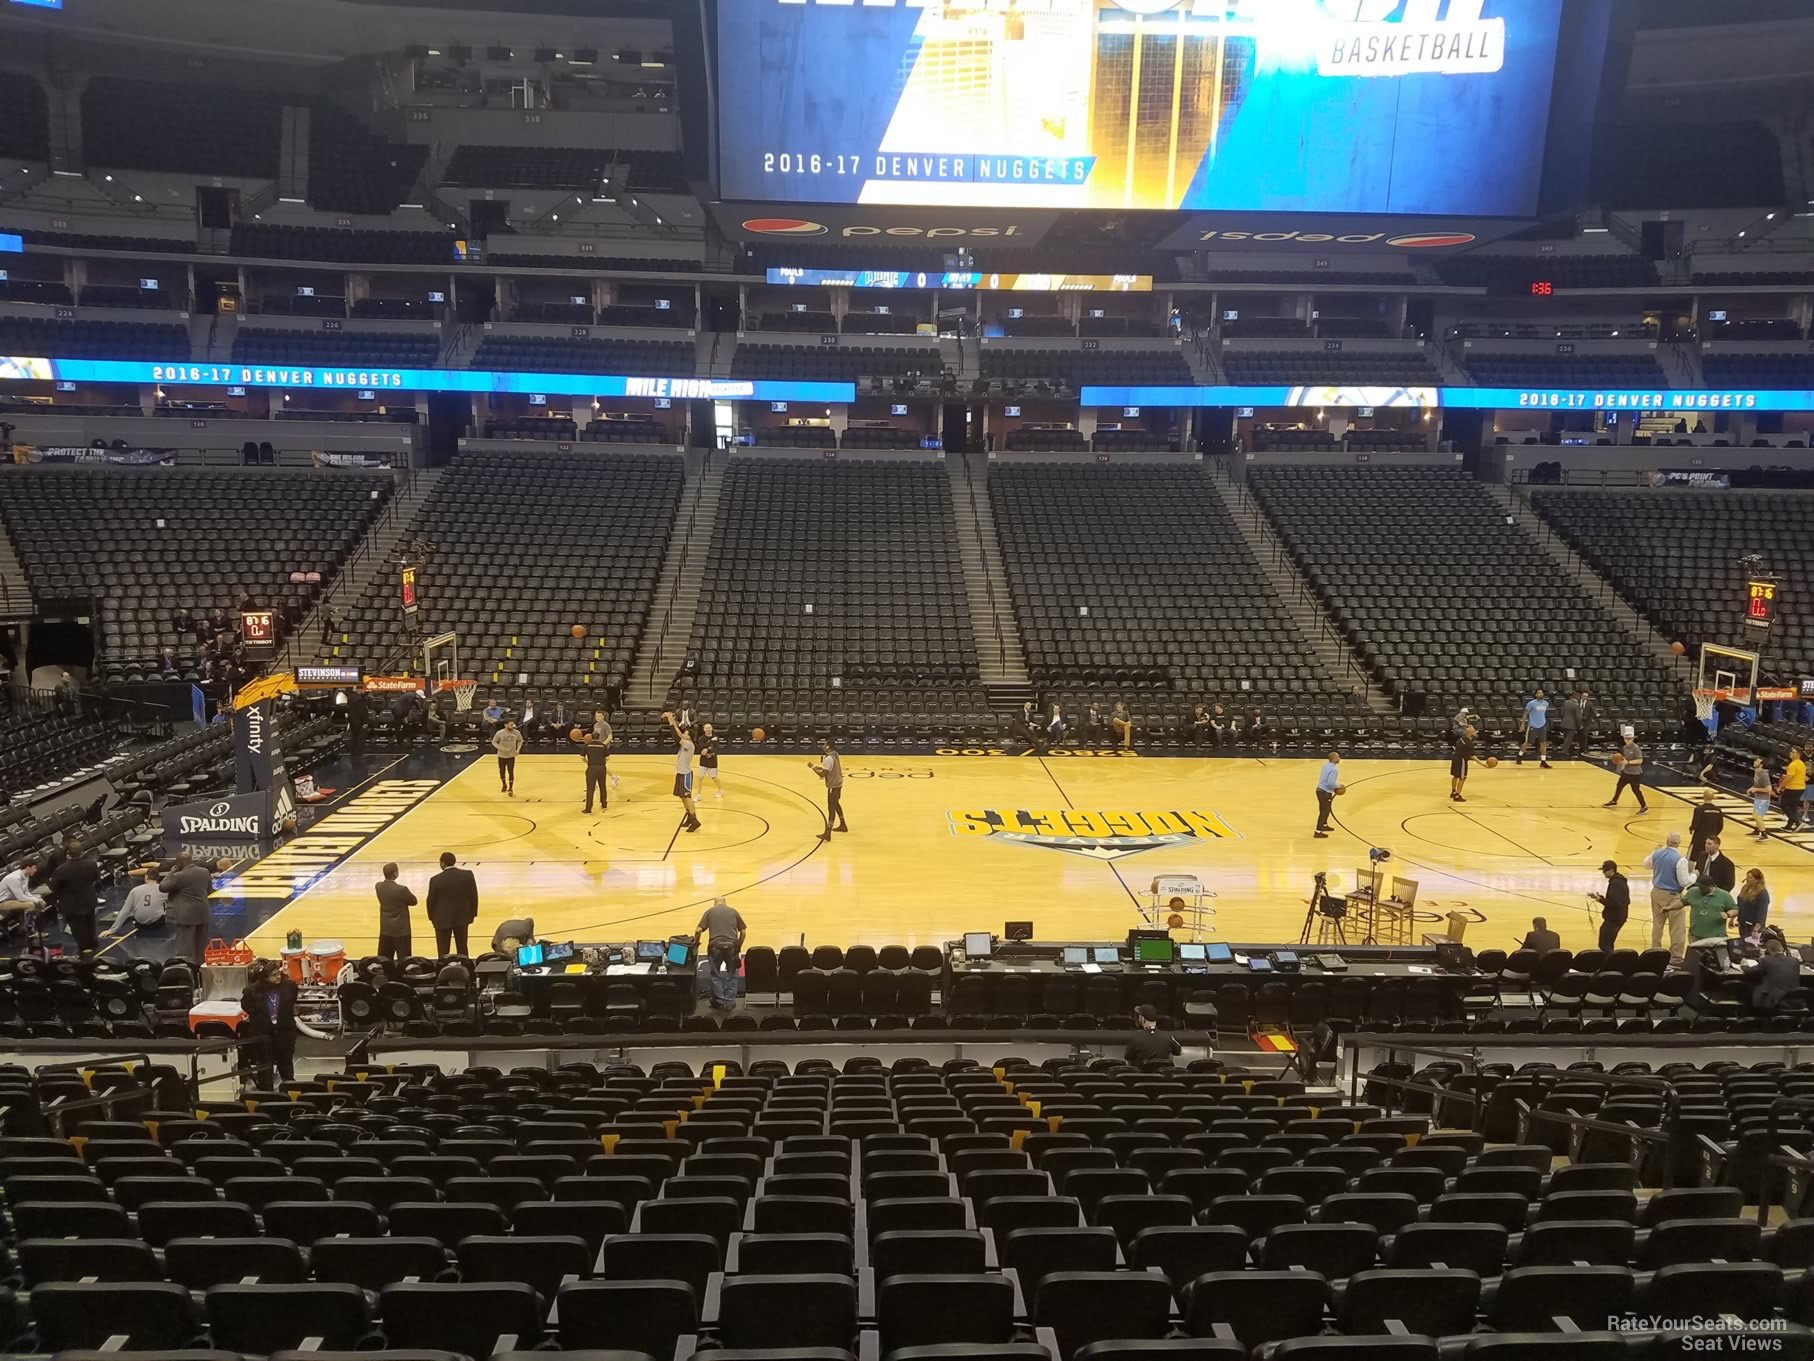 section 102, row 19 seat view  for basketball - ball arena